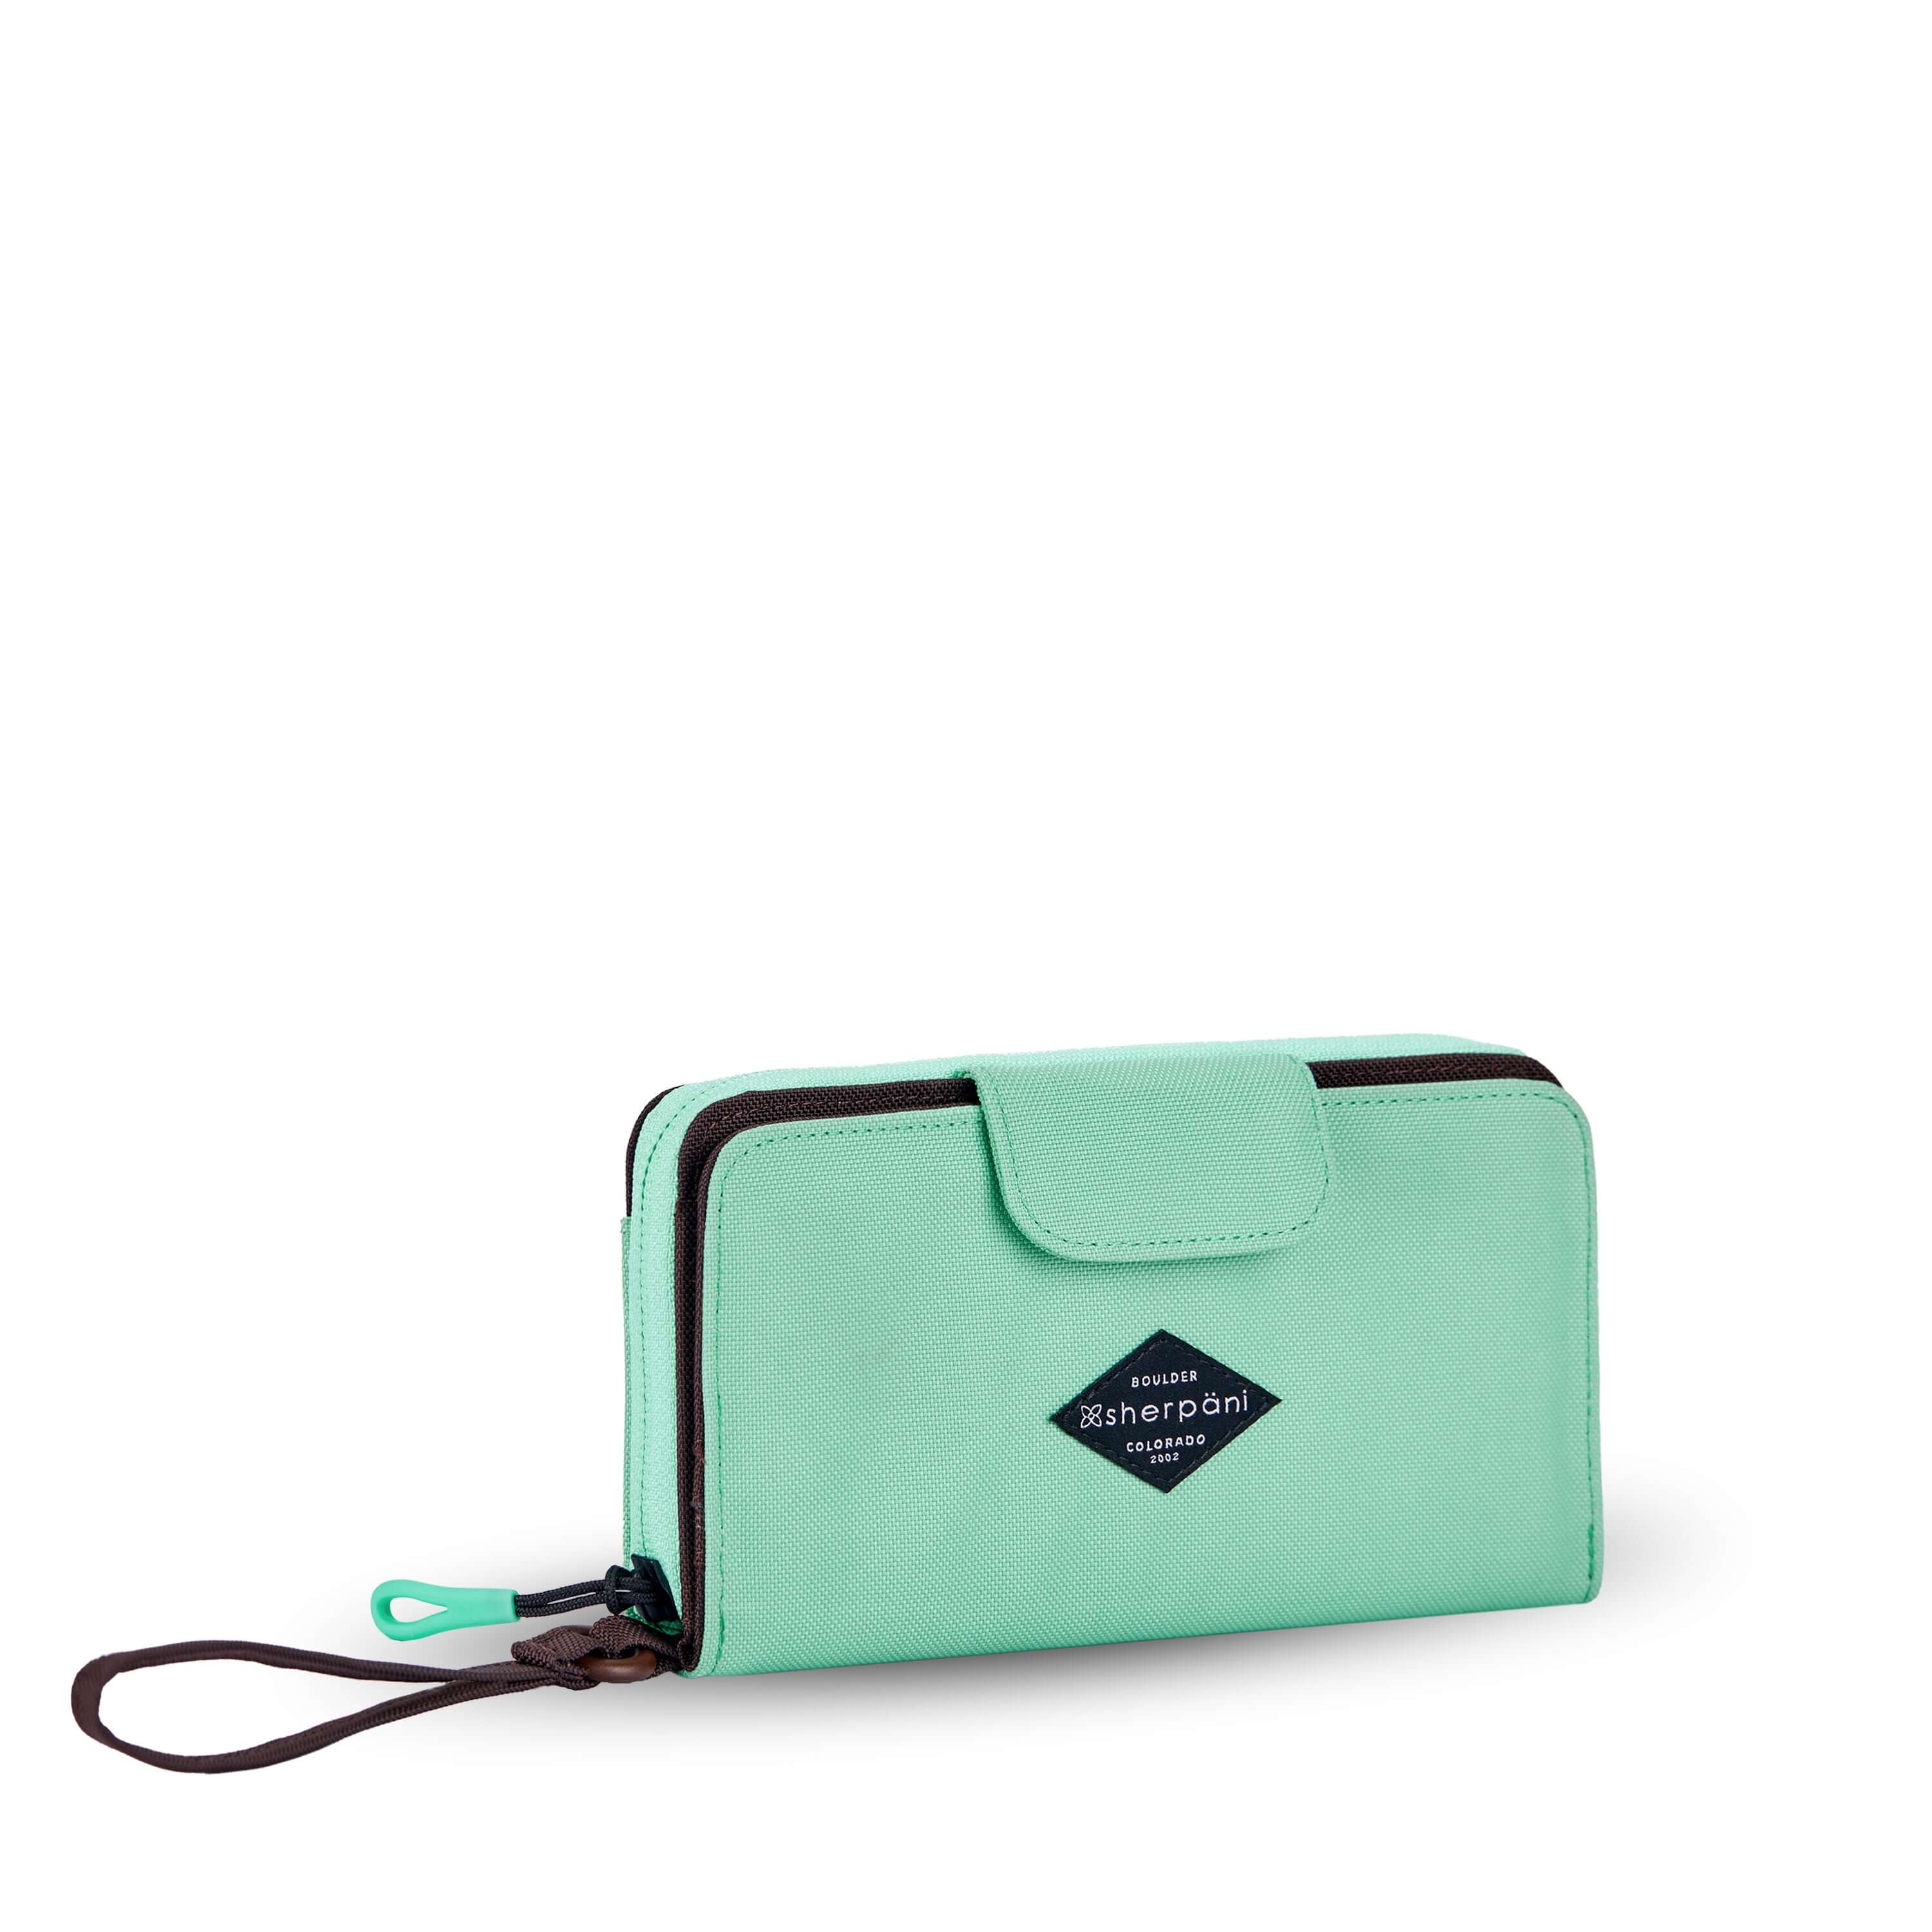 Angled front view of Sherpani wallet, the Tulum in Seagreen. The wallet is light green in color. There is a fabric flap with snap feature that folds over to open and close the wallet. There is a zipper compartment in the back with an easy-pull zipper accented in light green. The wallet features a wristlet strap in brown. #color_seagreen